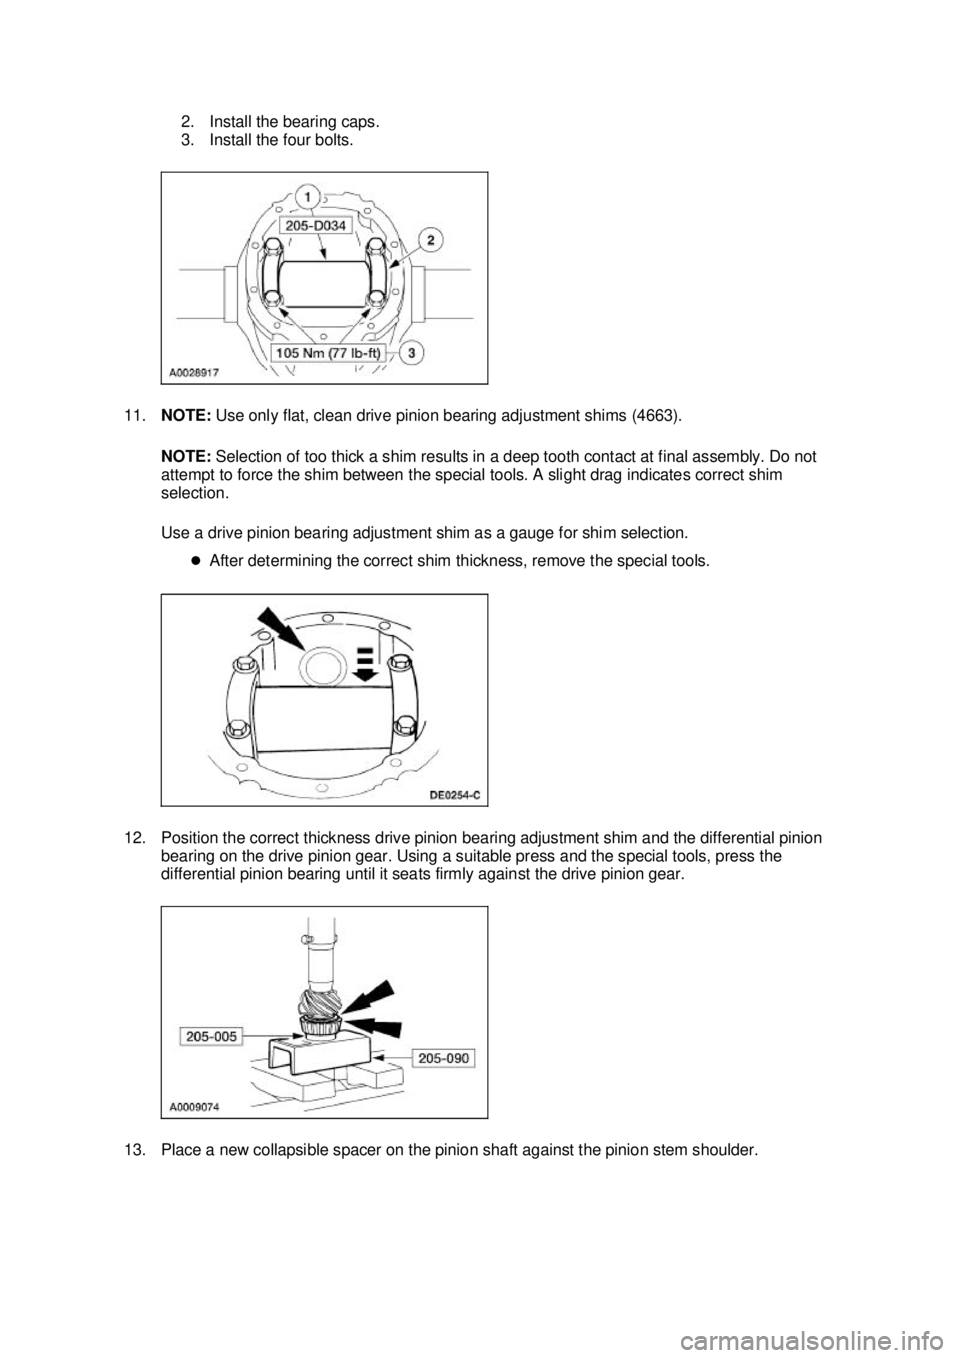 FORD MUSTANG 2003  Workshop Manual 2. Install the bearing caps. 
3. Install the four bolts. 
11. NOTE:  Use only flat, clean drive pinion bearing adjustment shims (4663). 
NOTE:  Selection of too thick a shim results in a deep tooth co